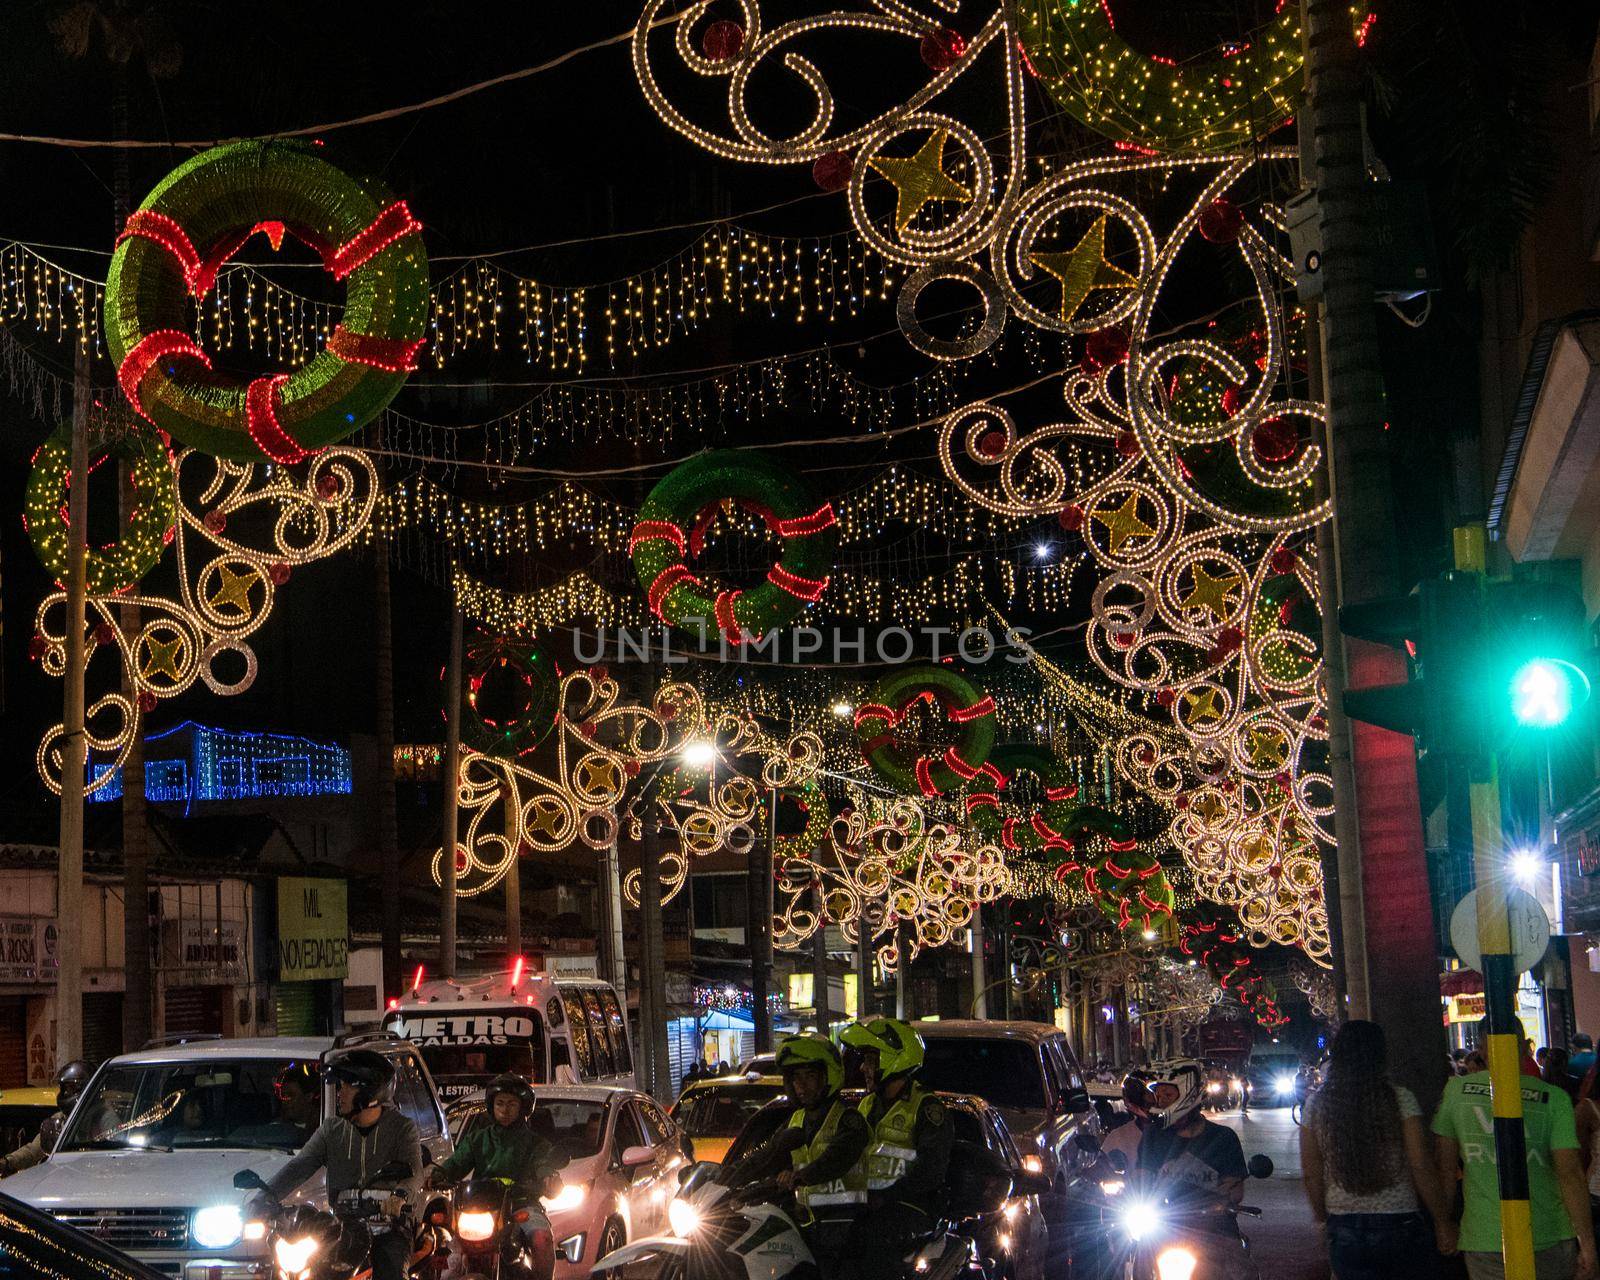 Christmas lights and wreaths in Medellin, Colombia.